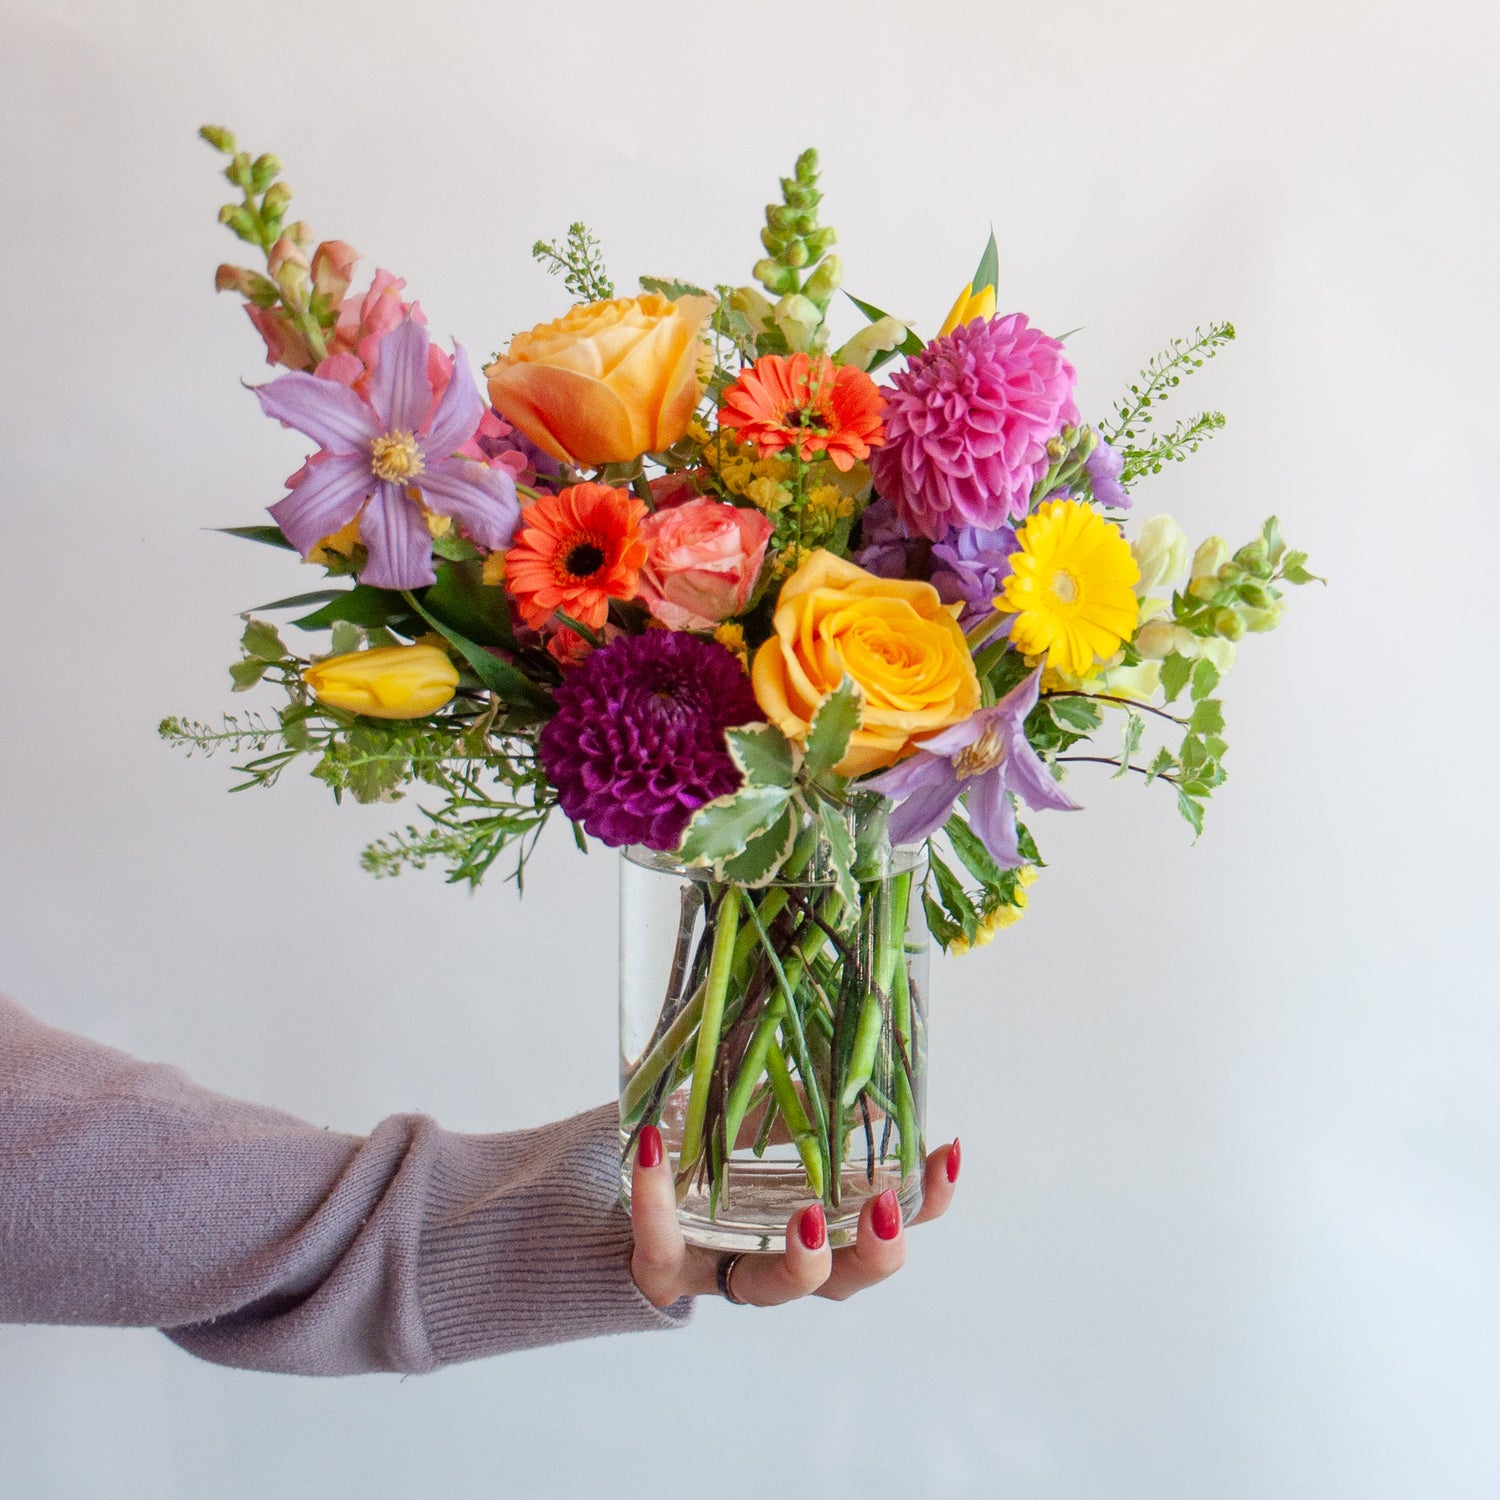 A hand holds a small hobnail arrangement with multi-colored blooms.